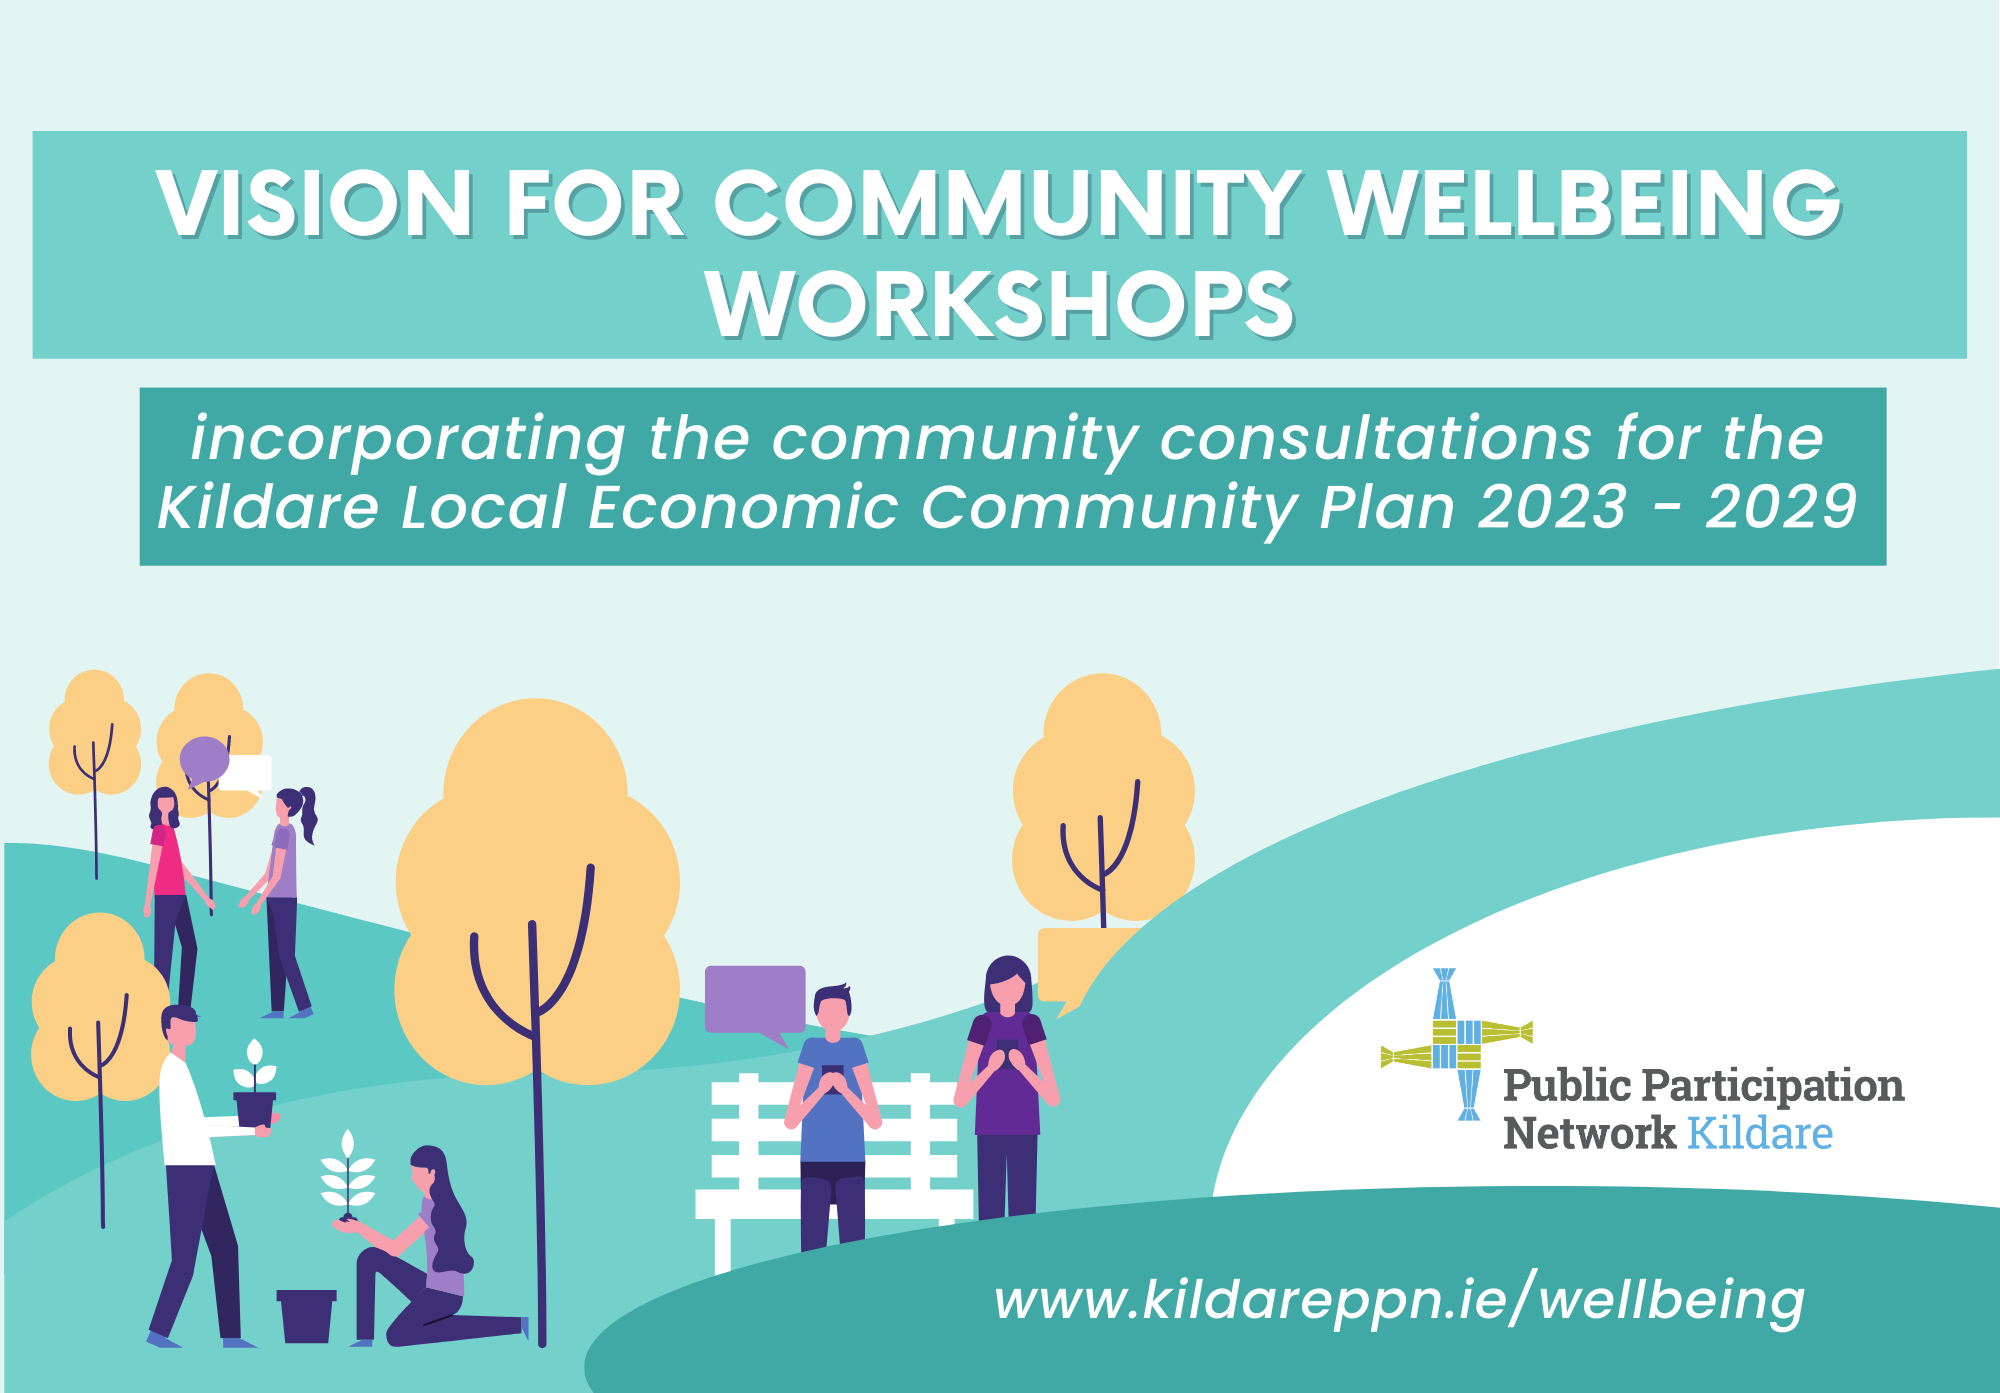 Community Wellbeing Workshops incorporating the community consultations for the Kildare Local Economic Community Plan